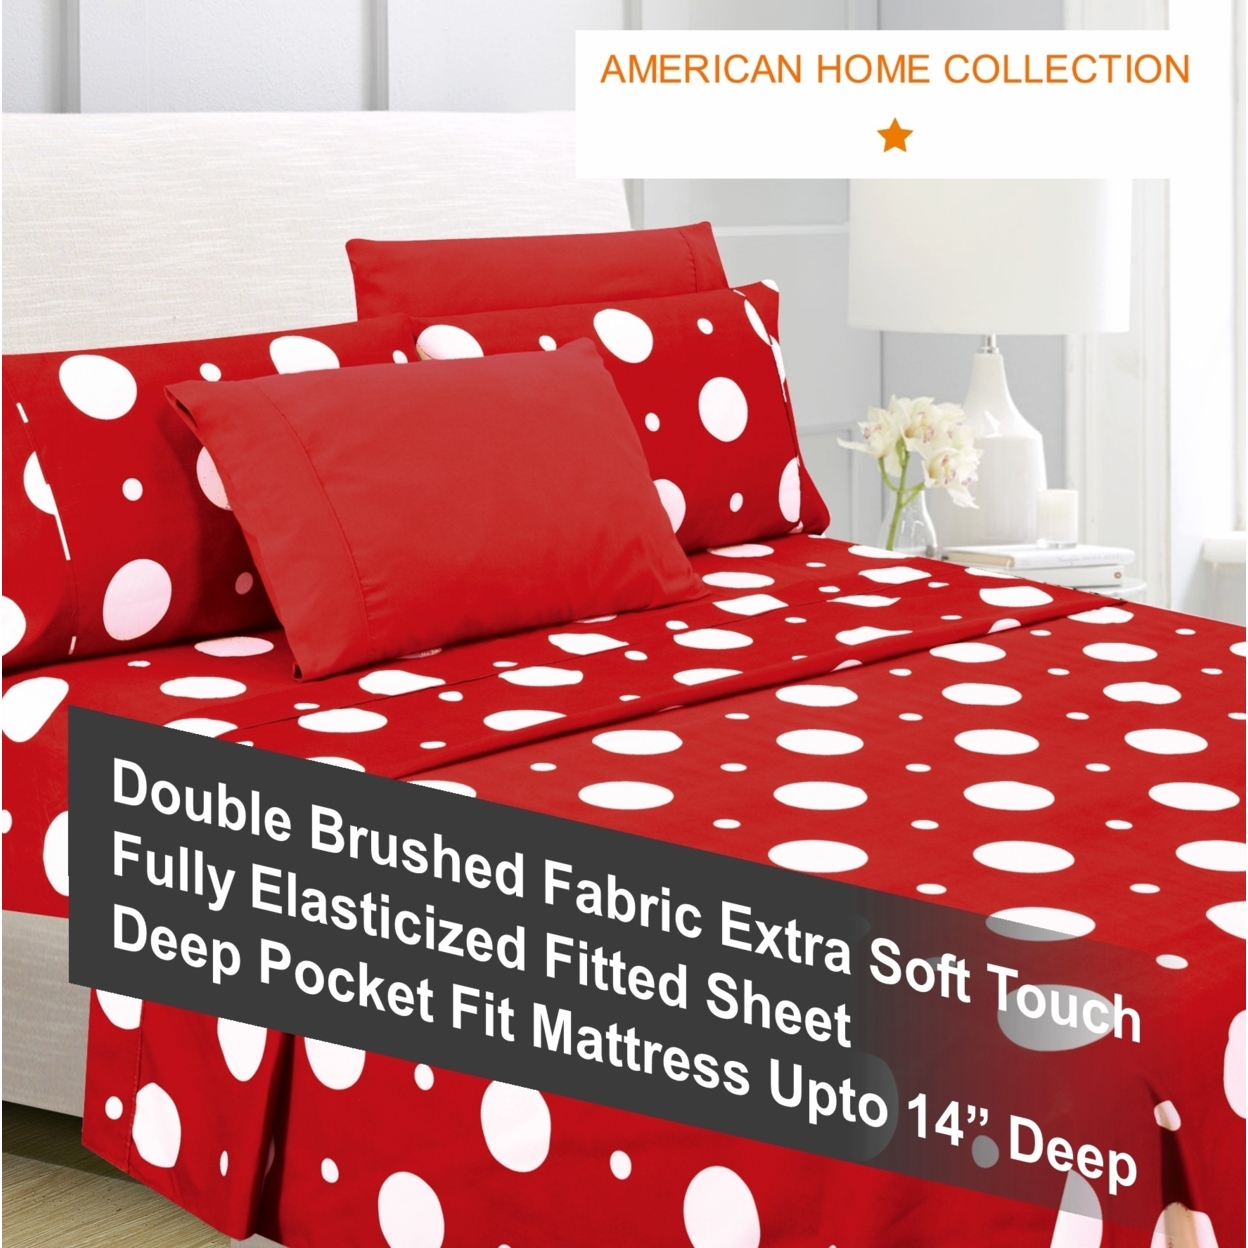 American Home Collection Ultra Soft 4-6 Piece Polka Dot Printed Bed Sheet Set - Queen, Red